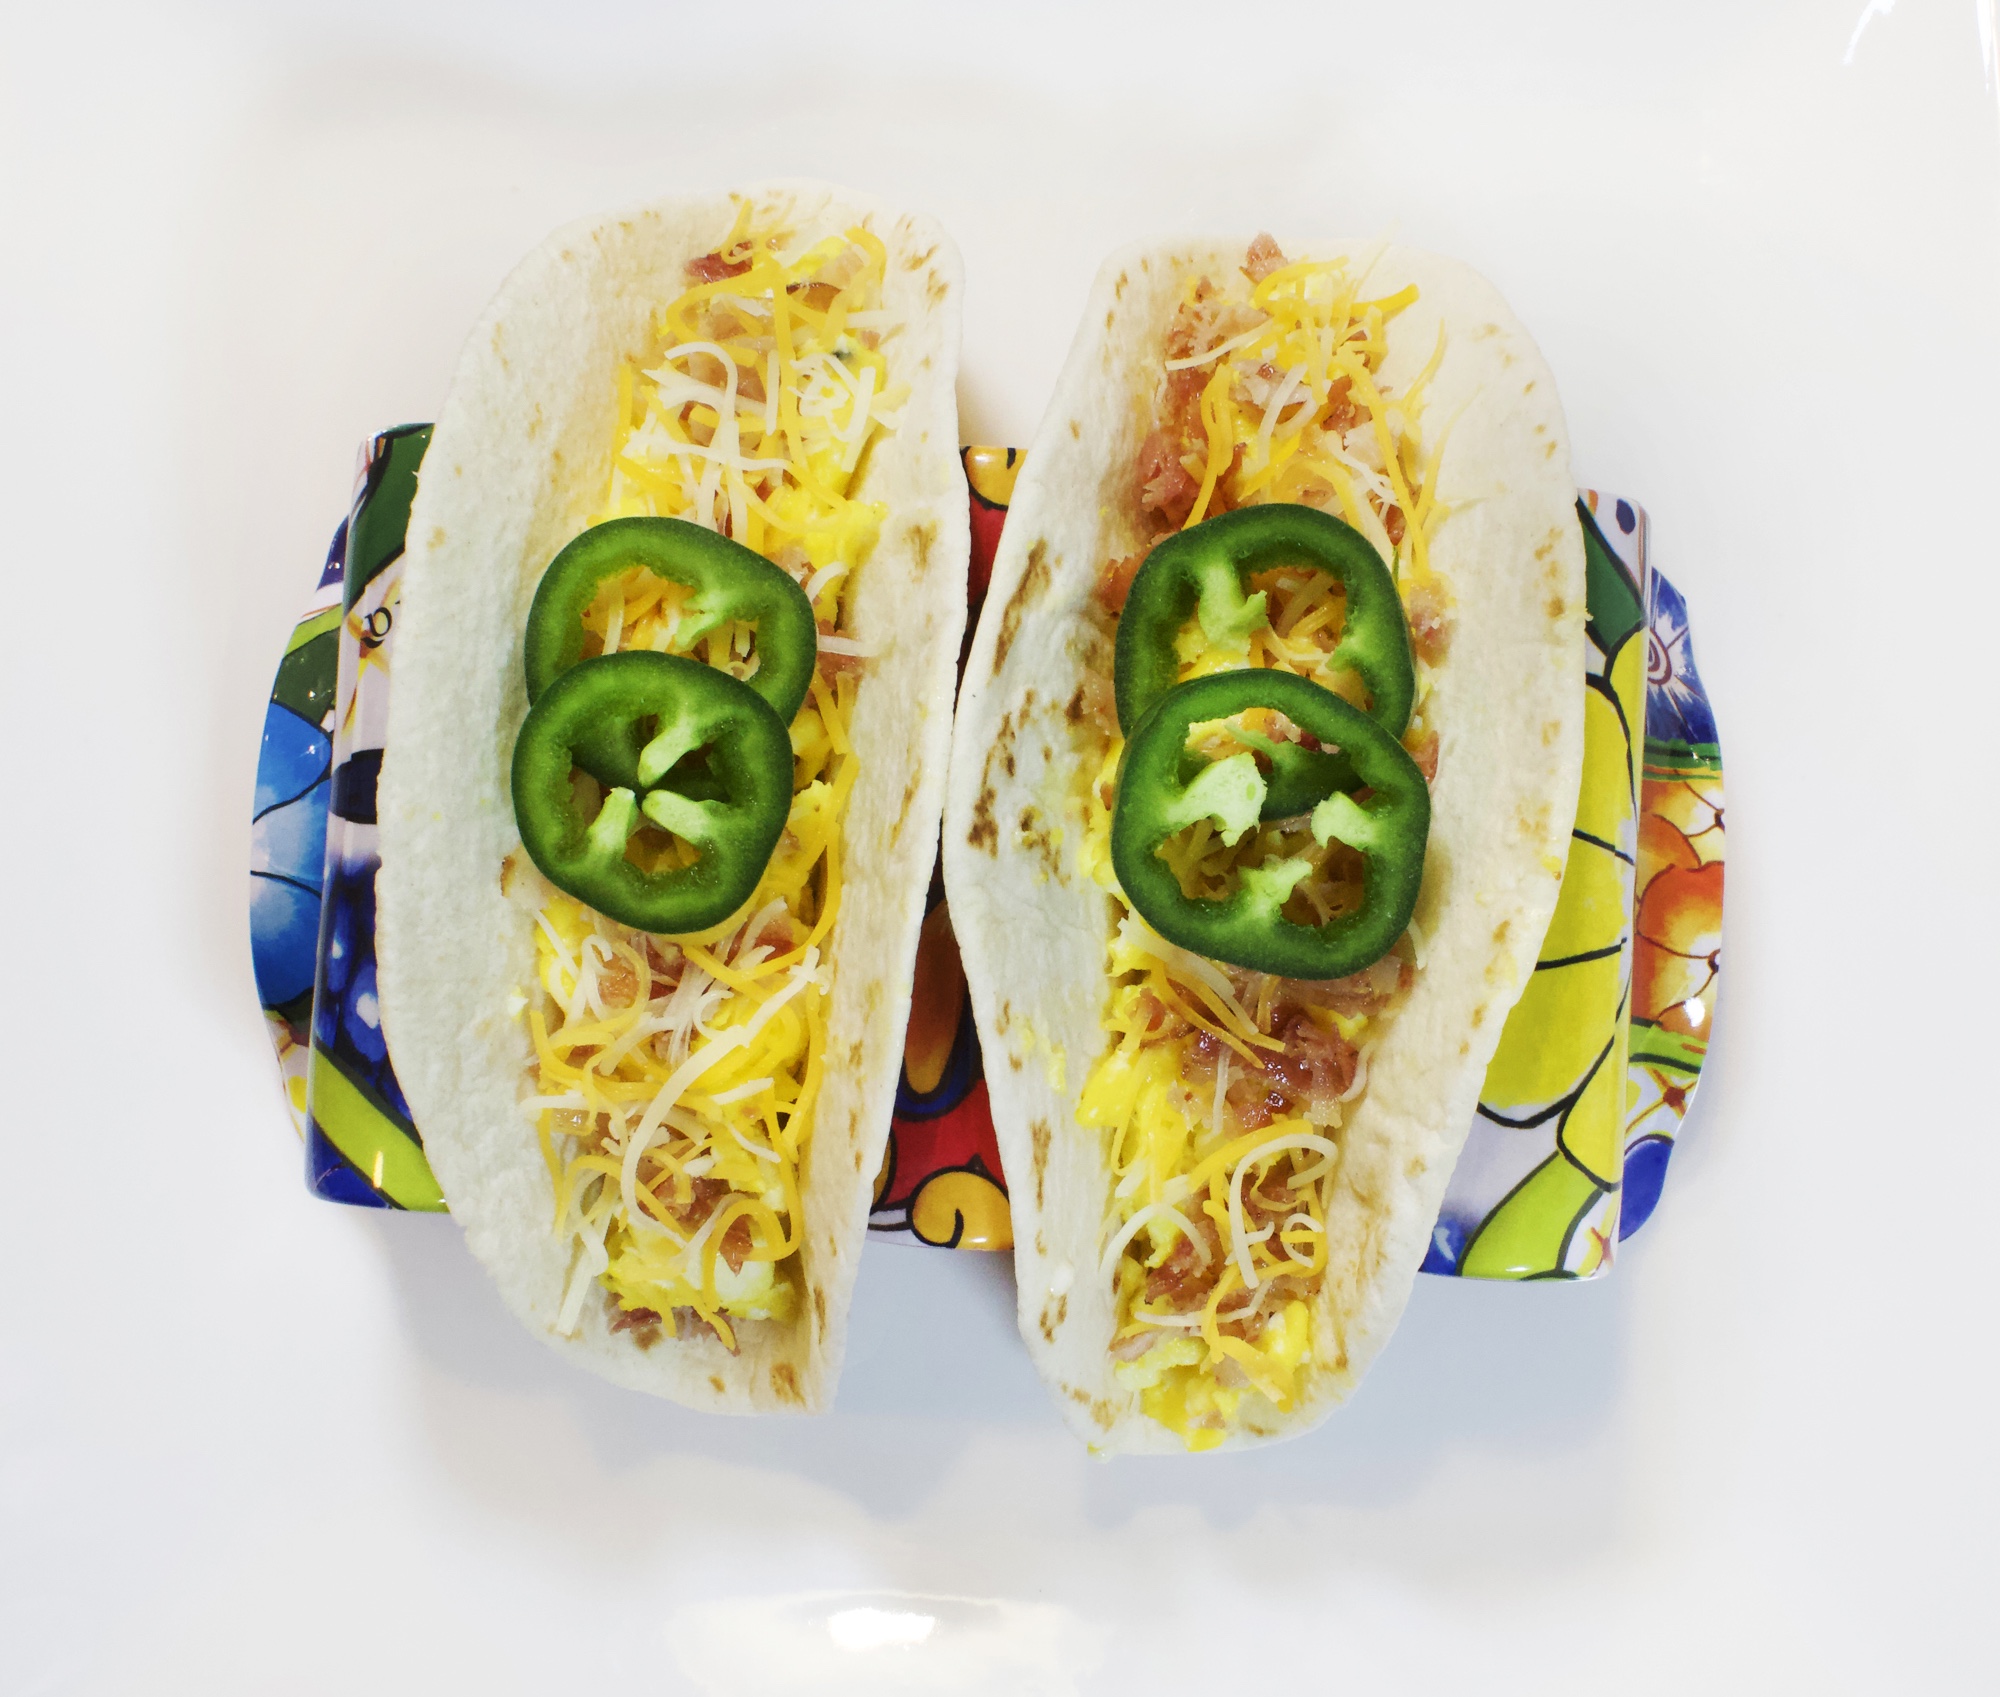 Two tacos served with scrambled eggs, pieces of bacon, shredded cheese and garnished with jalapeños.